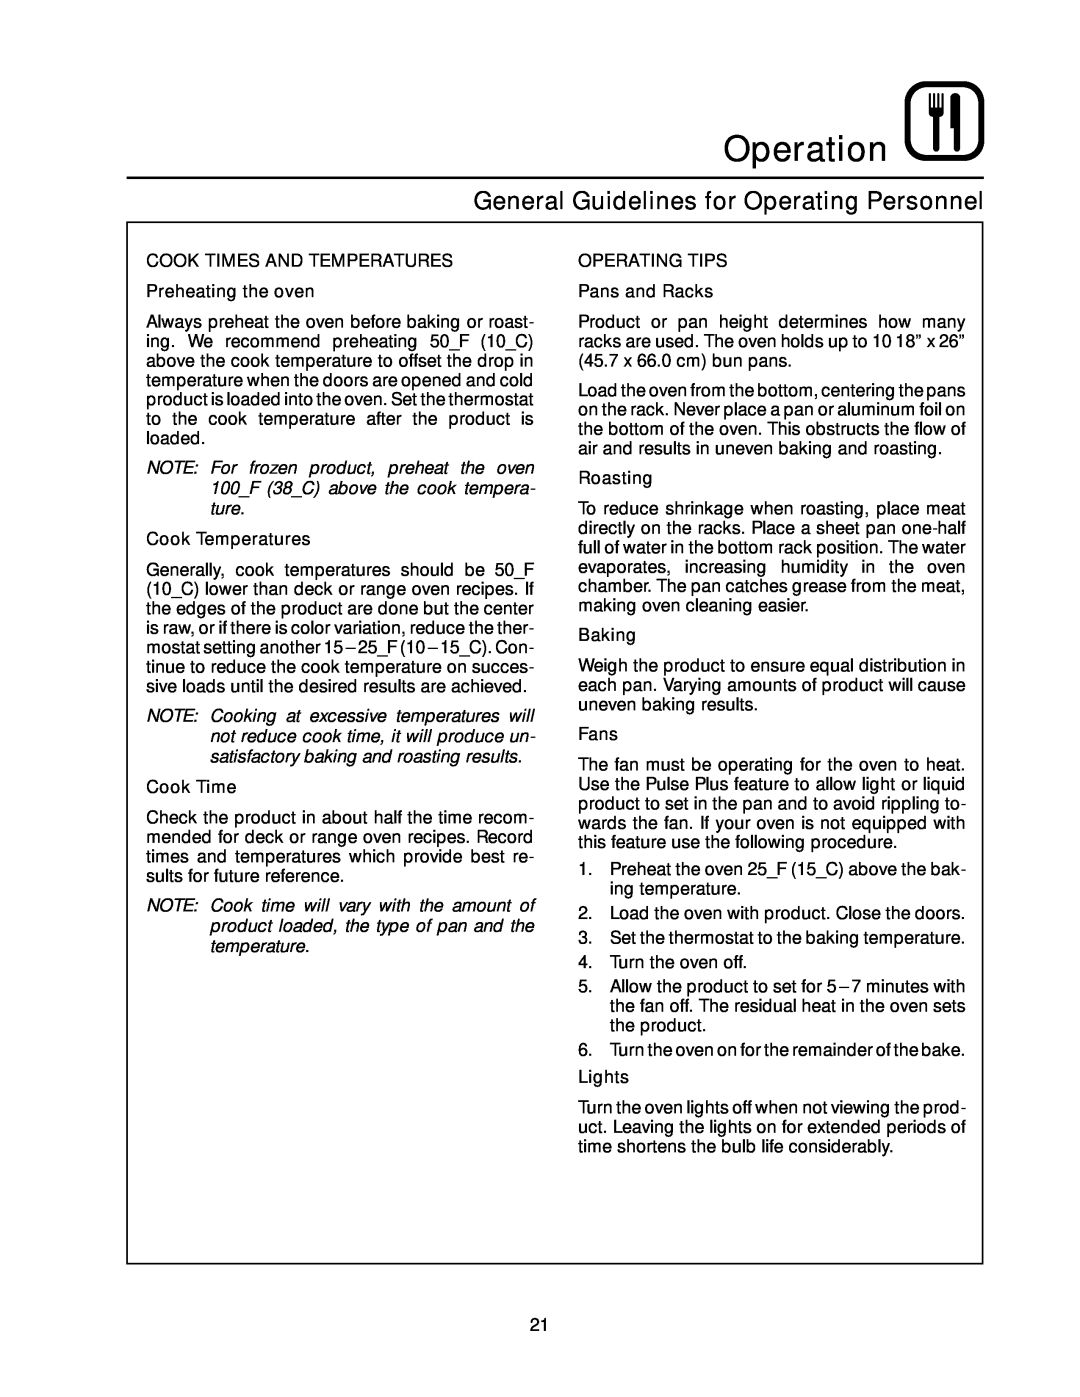 Blodgett RE Series General Guidelines for Operating Personnel, Operation, COOK TIMES AND TEMPERATURES Preheating the oven 